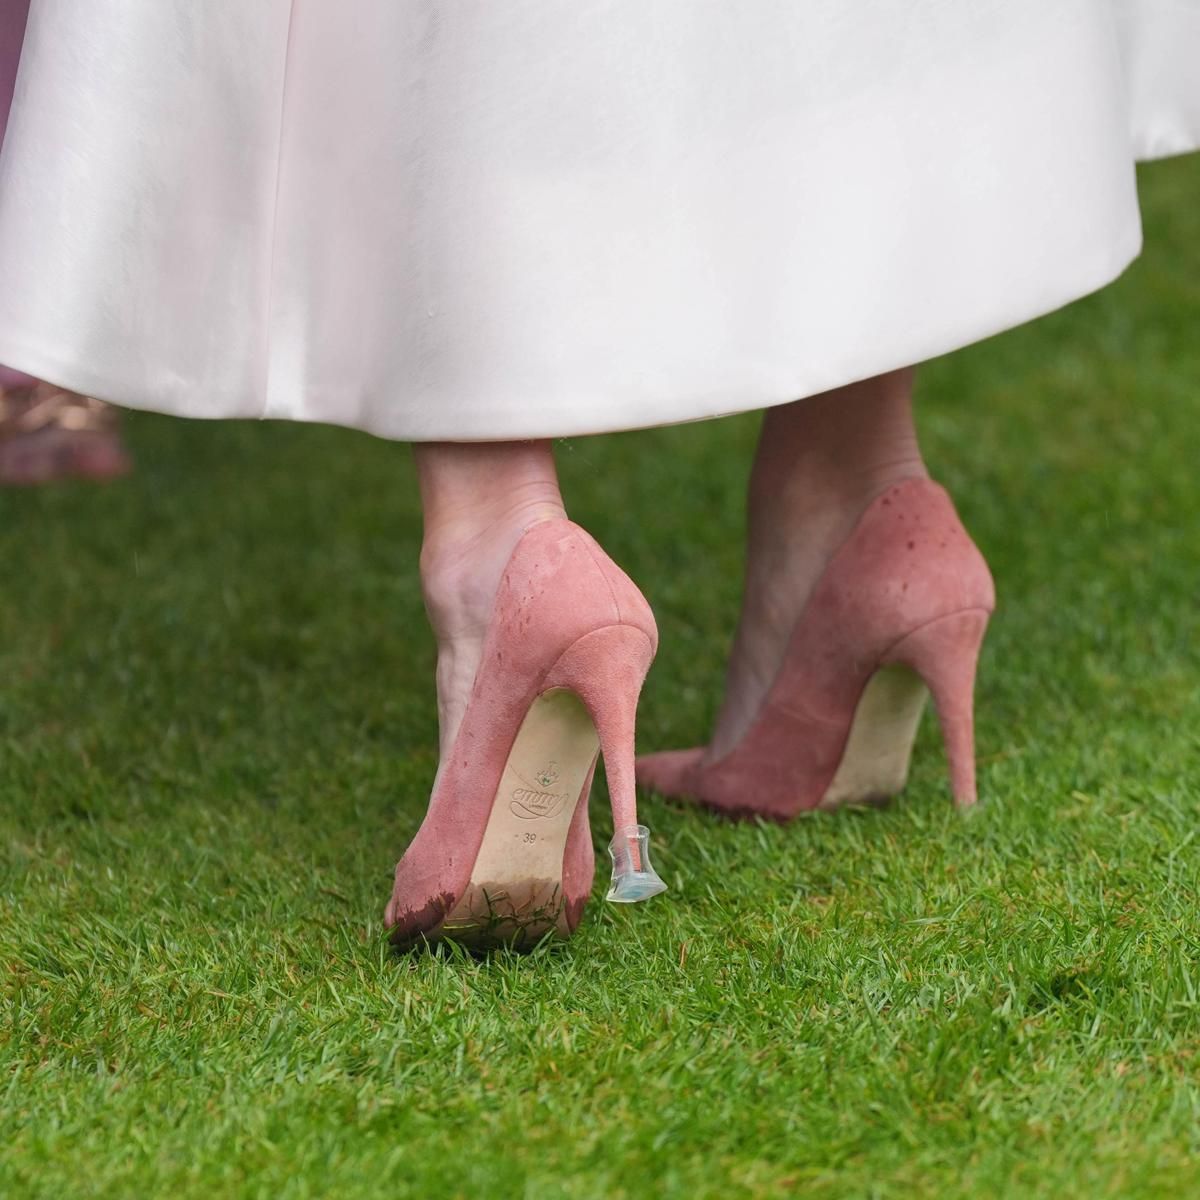 Zara prevented her suede pumps from sinking into the wet grass with clear heel stoppers.